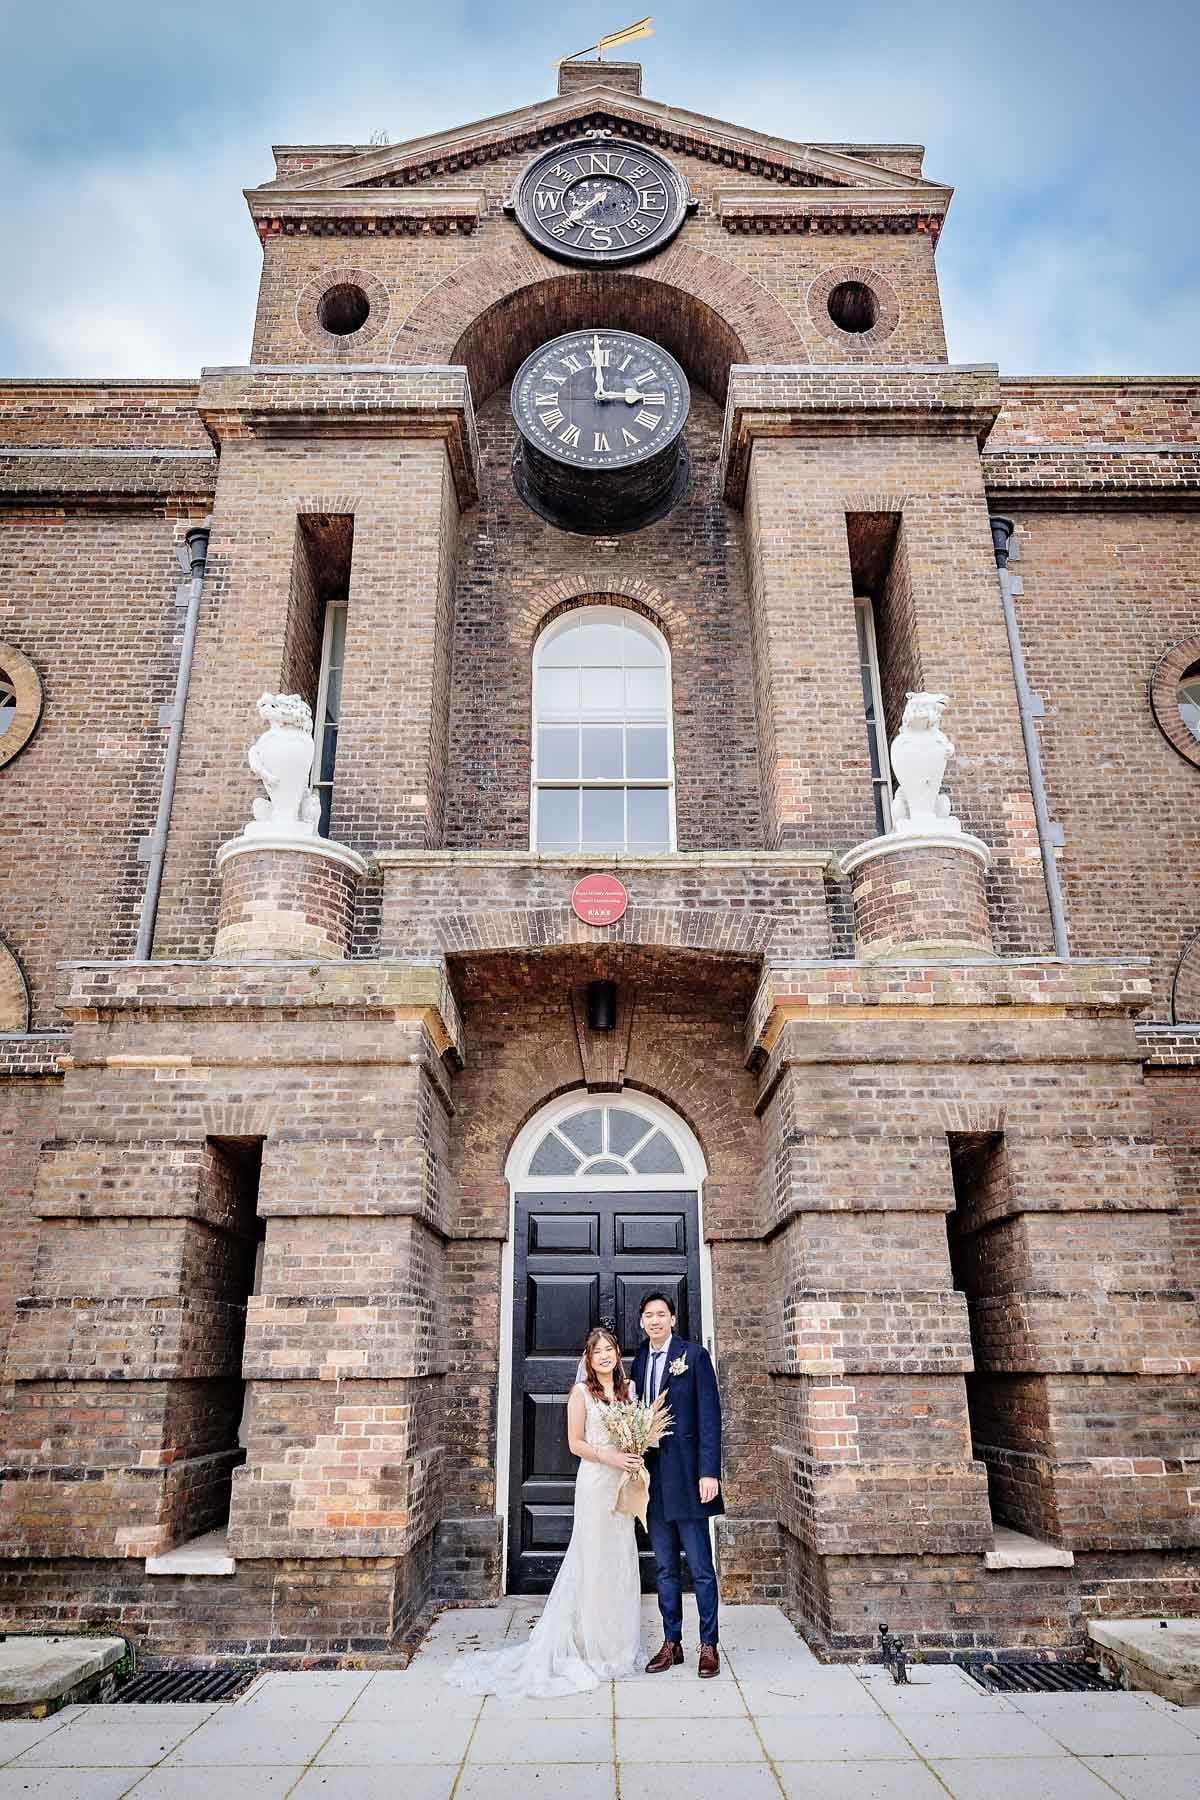 Newly-weds pose in front of building with clock and weathervane, Woolwich